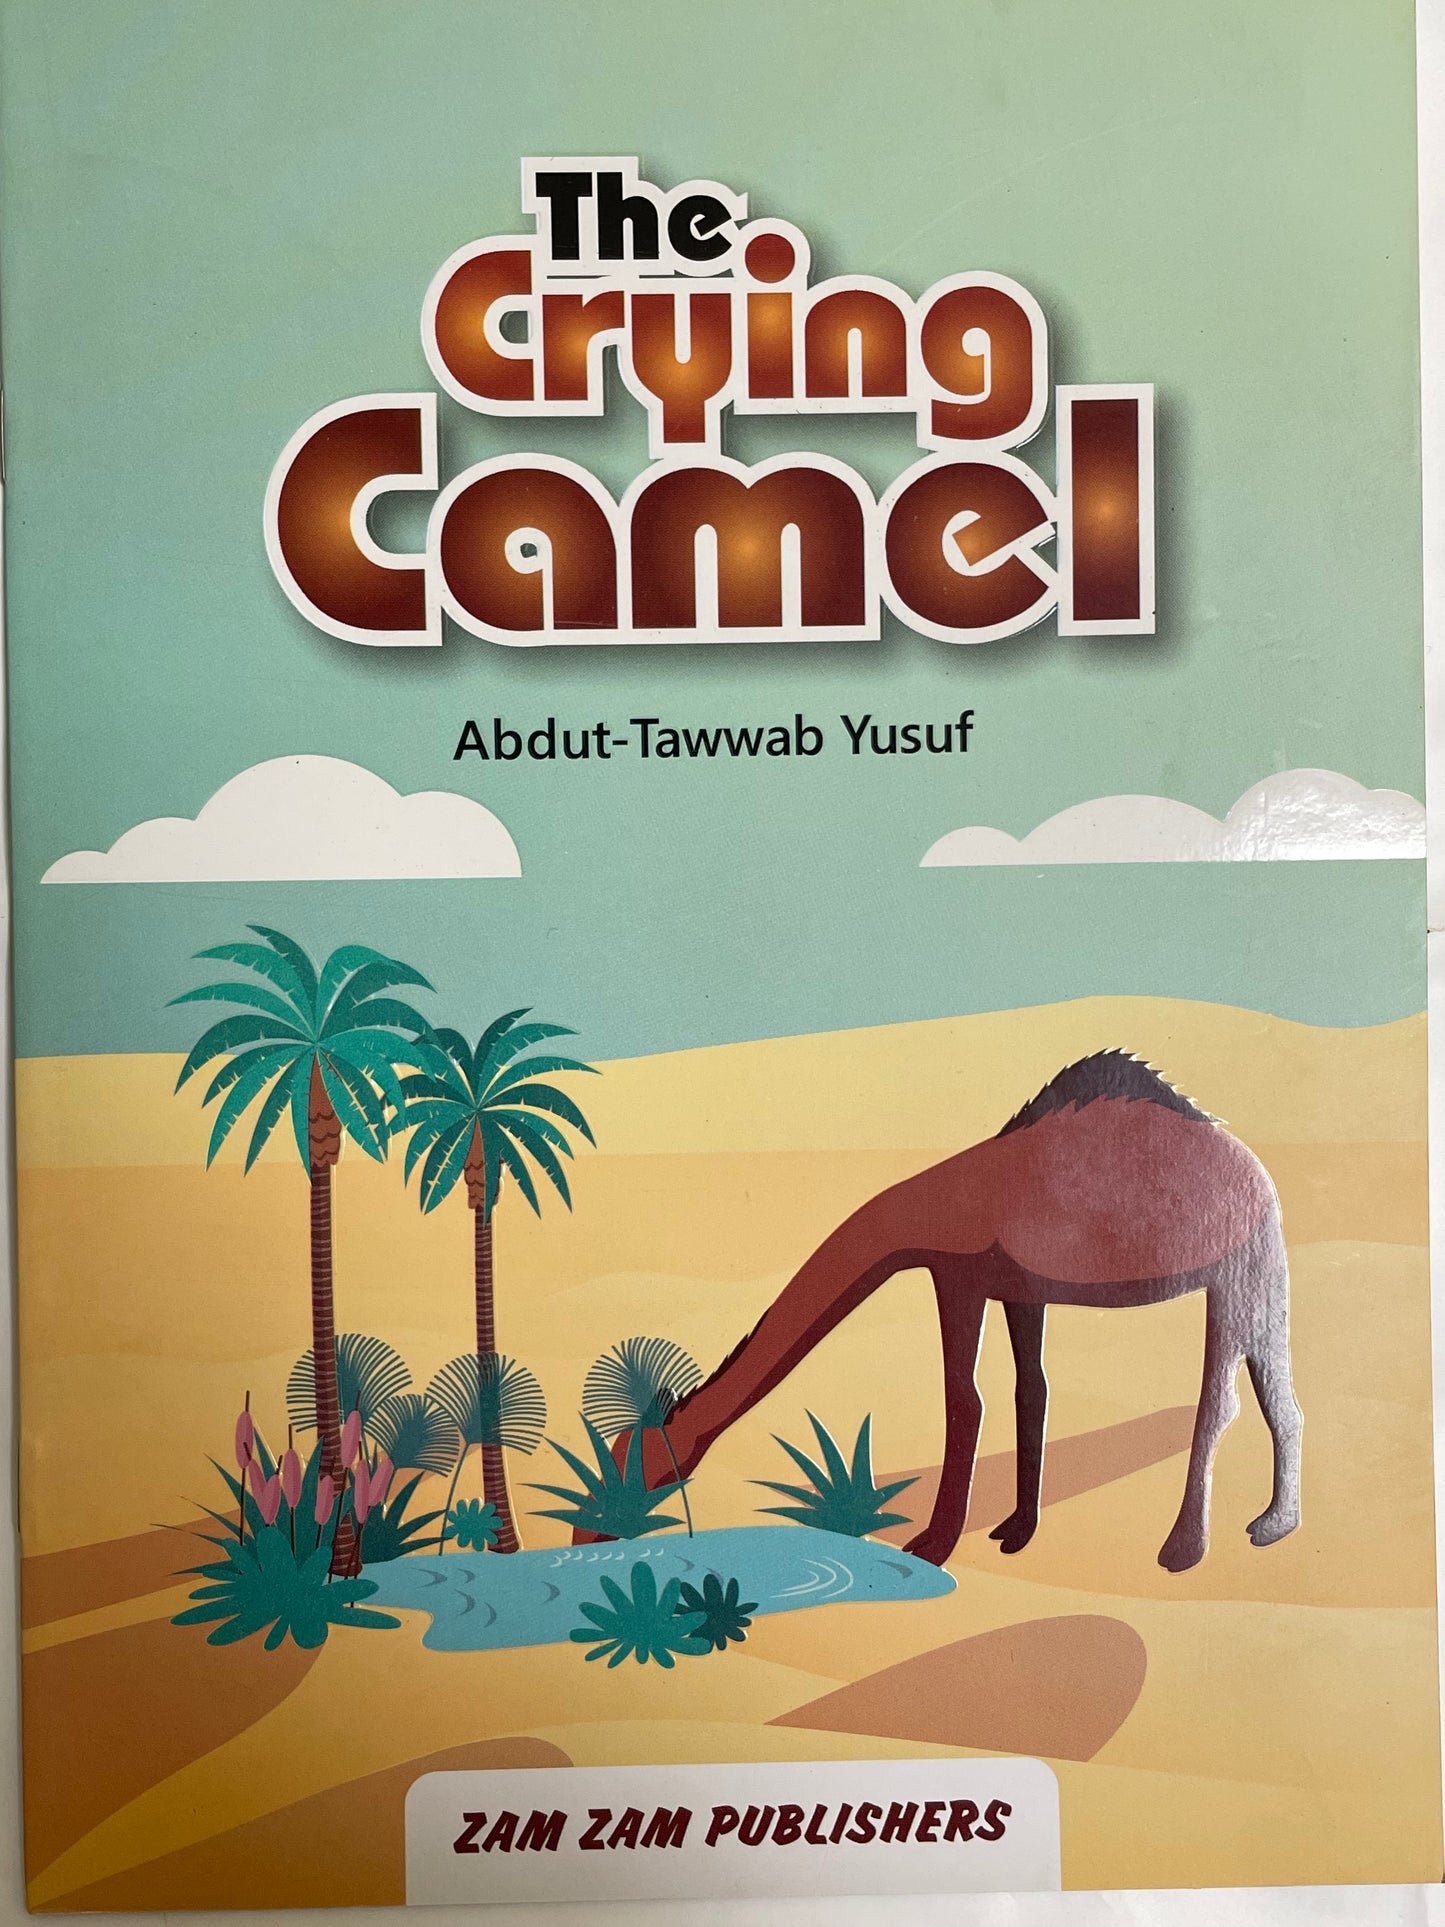 The Crying Camel